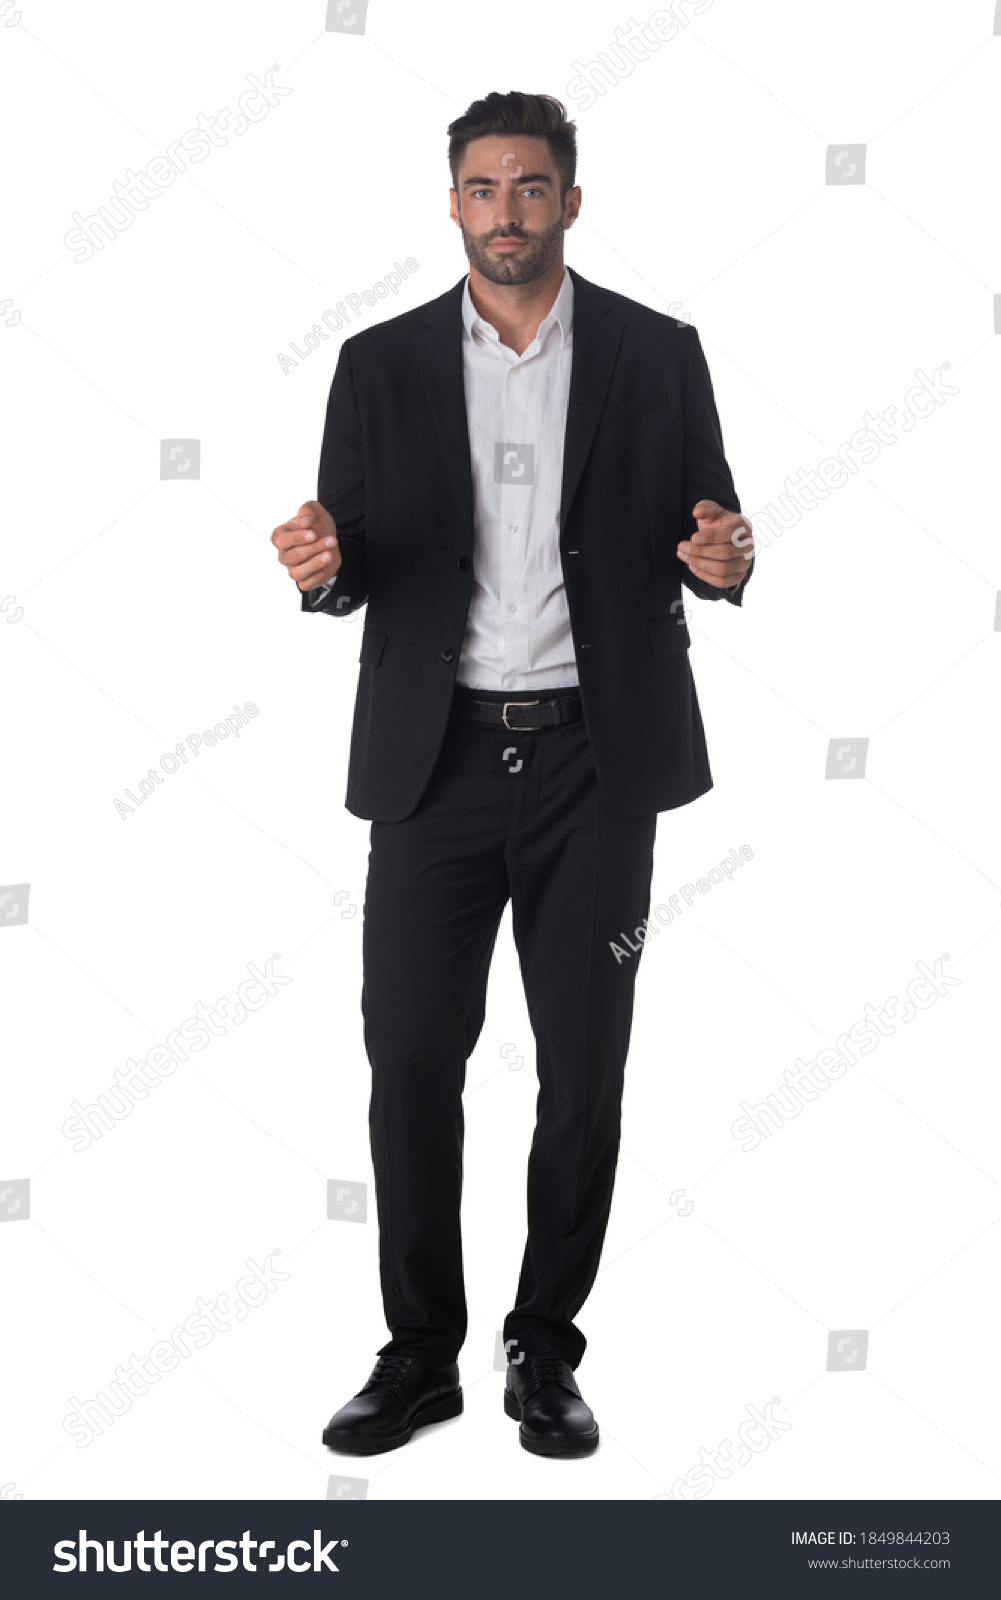 Full length portrait of young handsome business man in black suit holding something in hands studio isolated on white background #1849844203